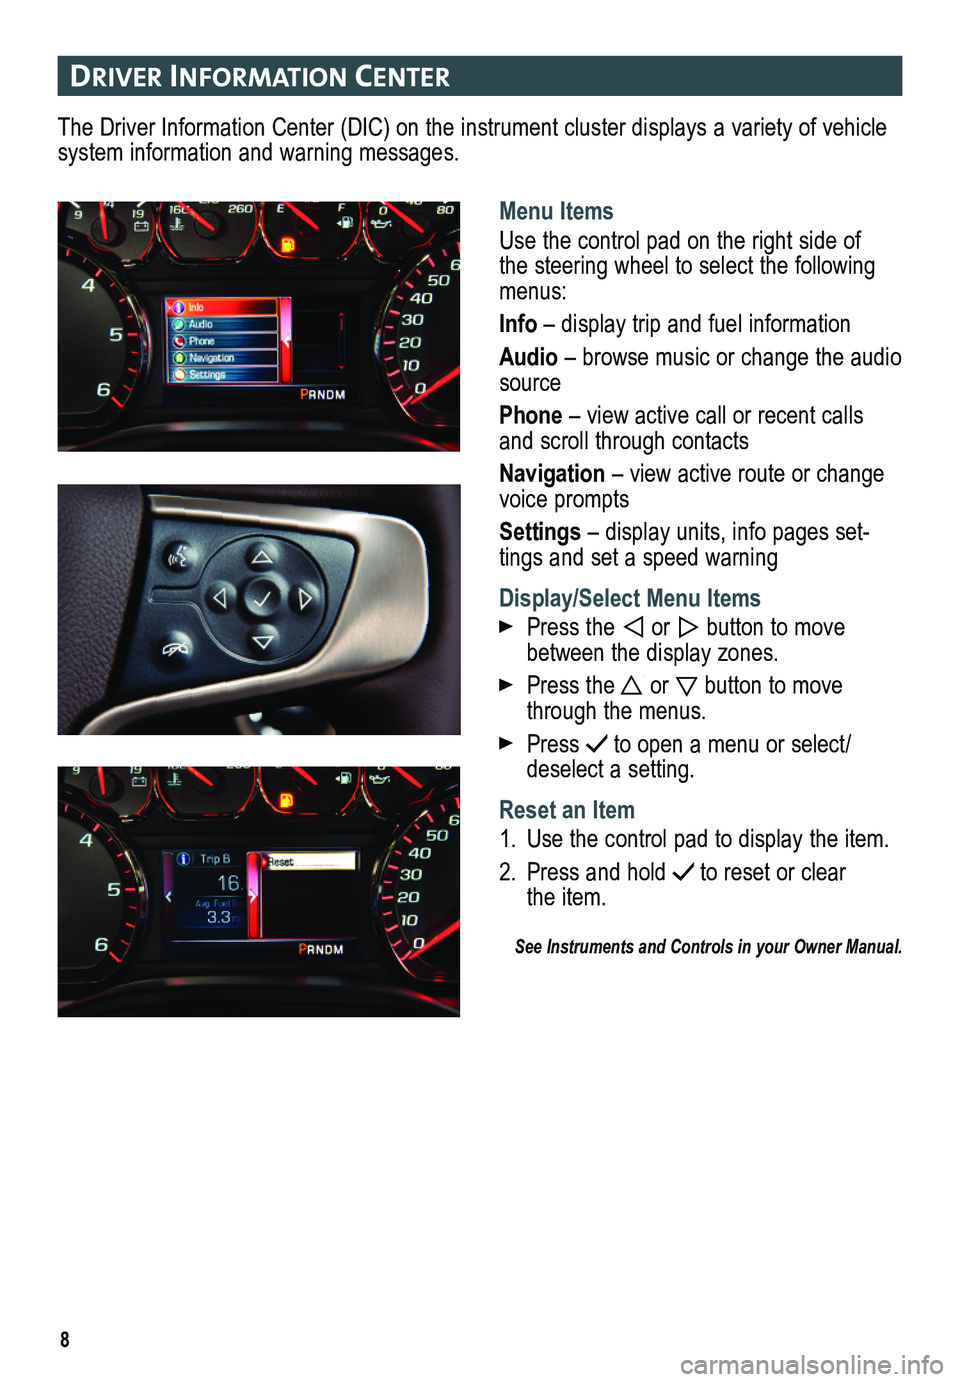 GMC YUKON 2015  Get To Know Guide 8
DrIver In Format Ion center
The Driver Information Center (DIC) on the instrument cluster displays a variety of vehicle system information and warning messages.
Menu Items
Use the control pad on the